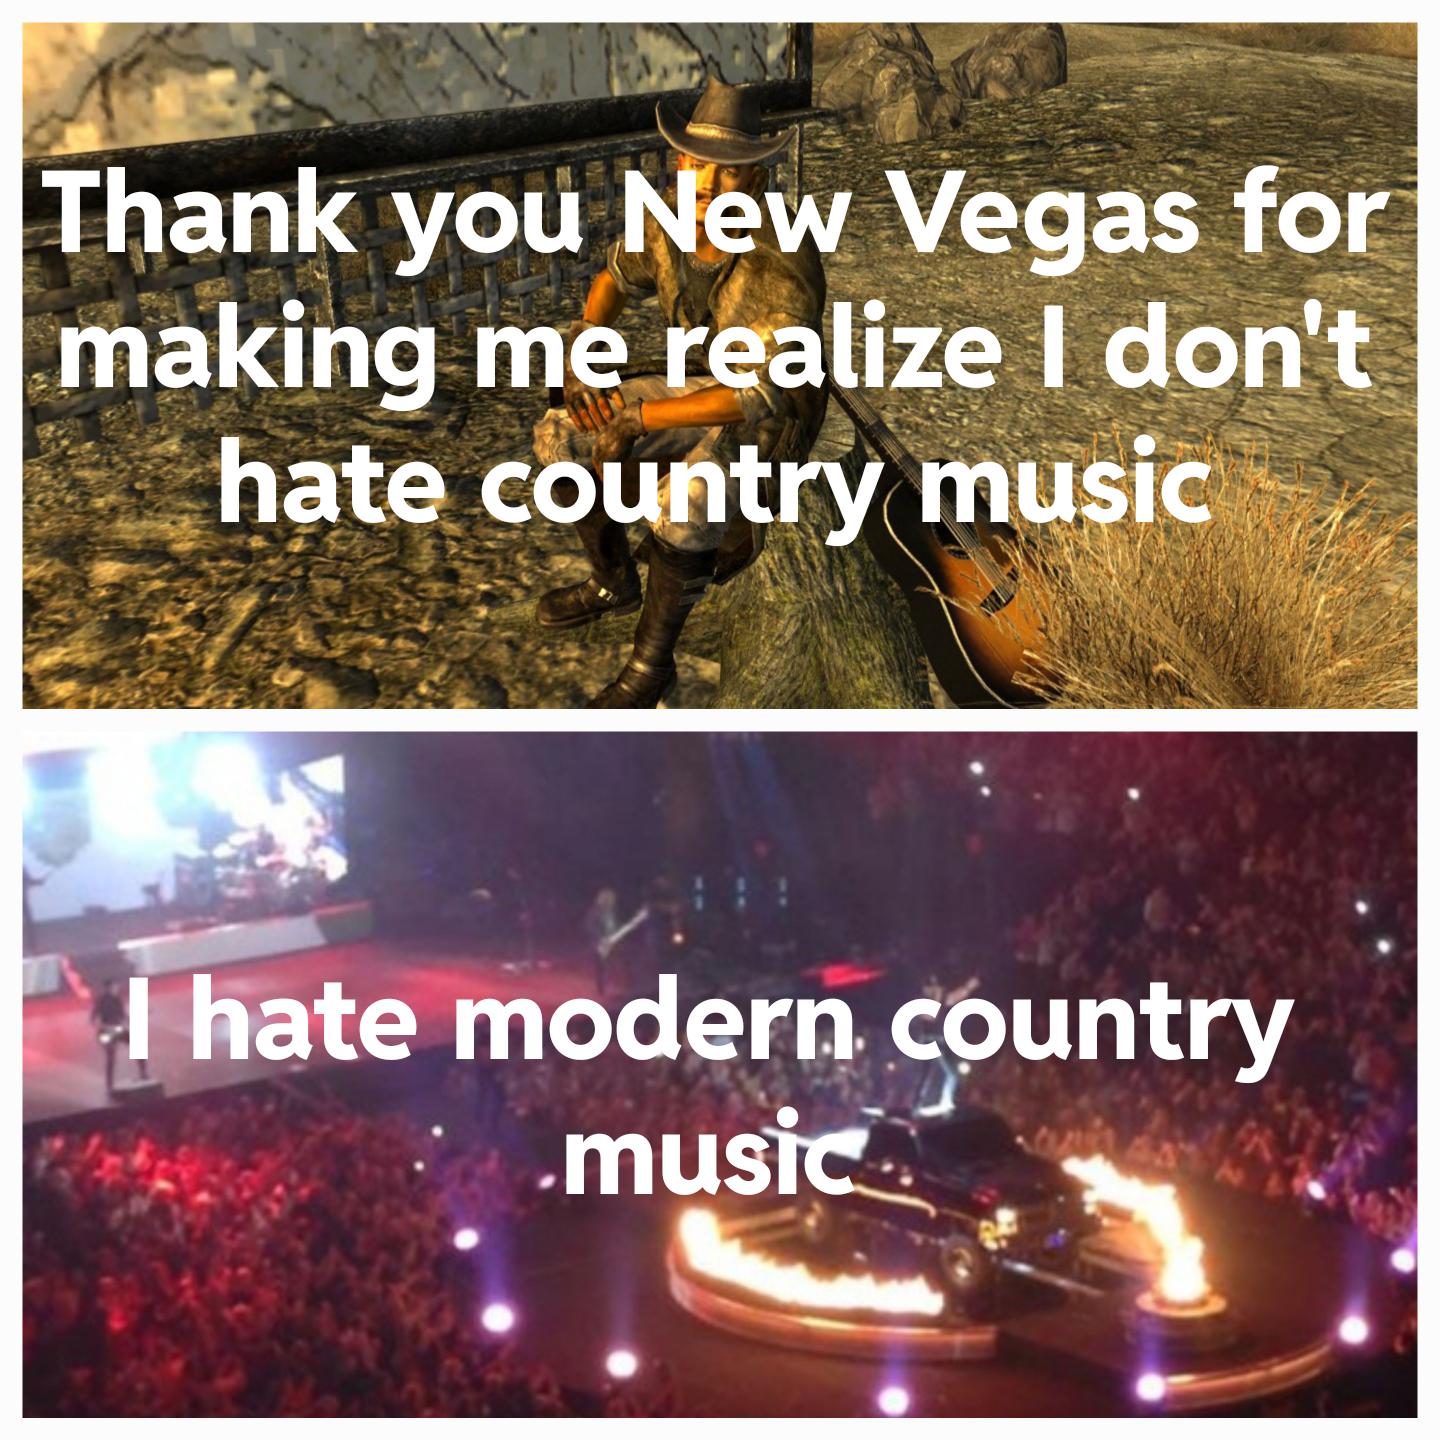 heat - Thank you New Vegas for making me realize I don't hate country music I hate modern country music